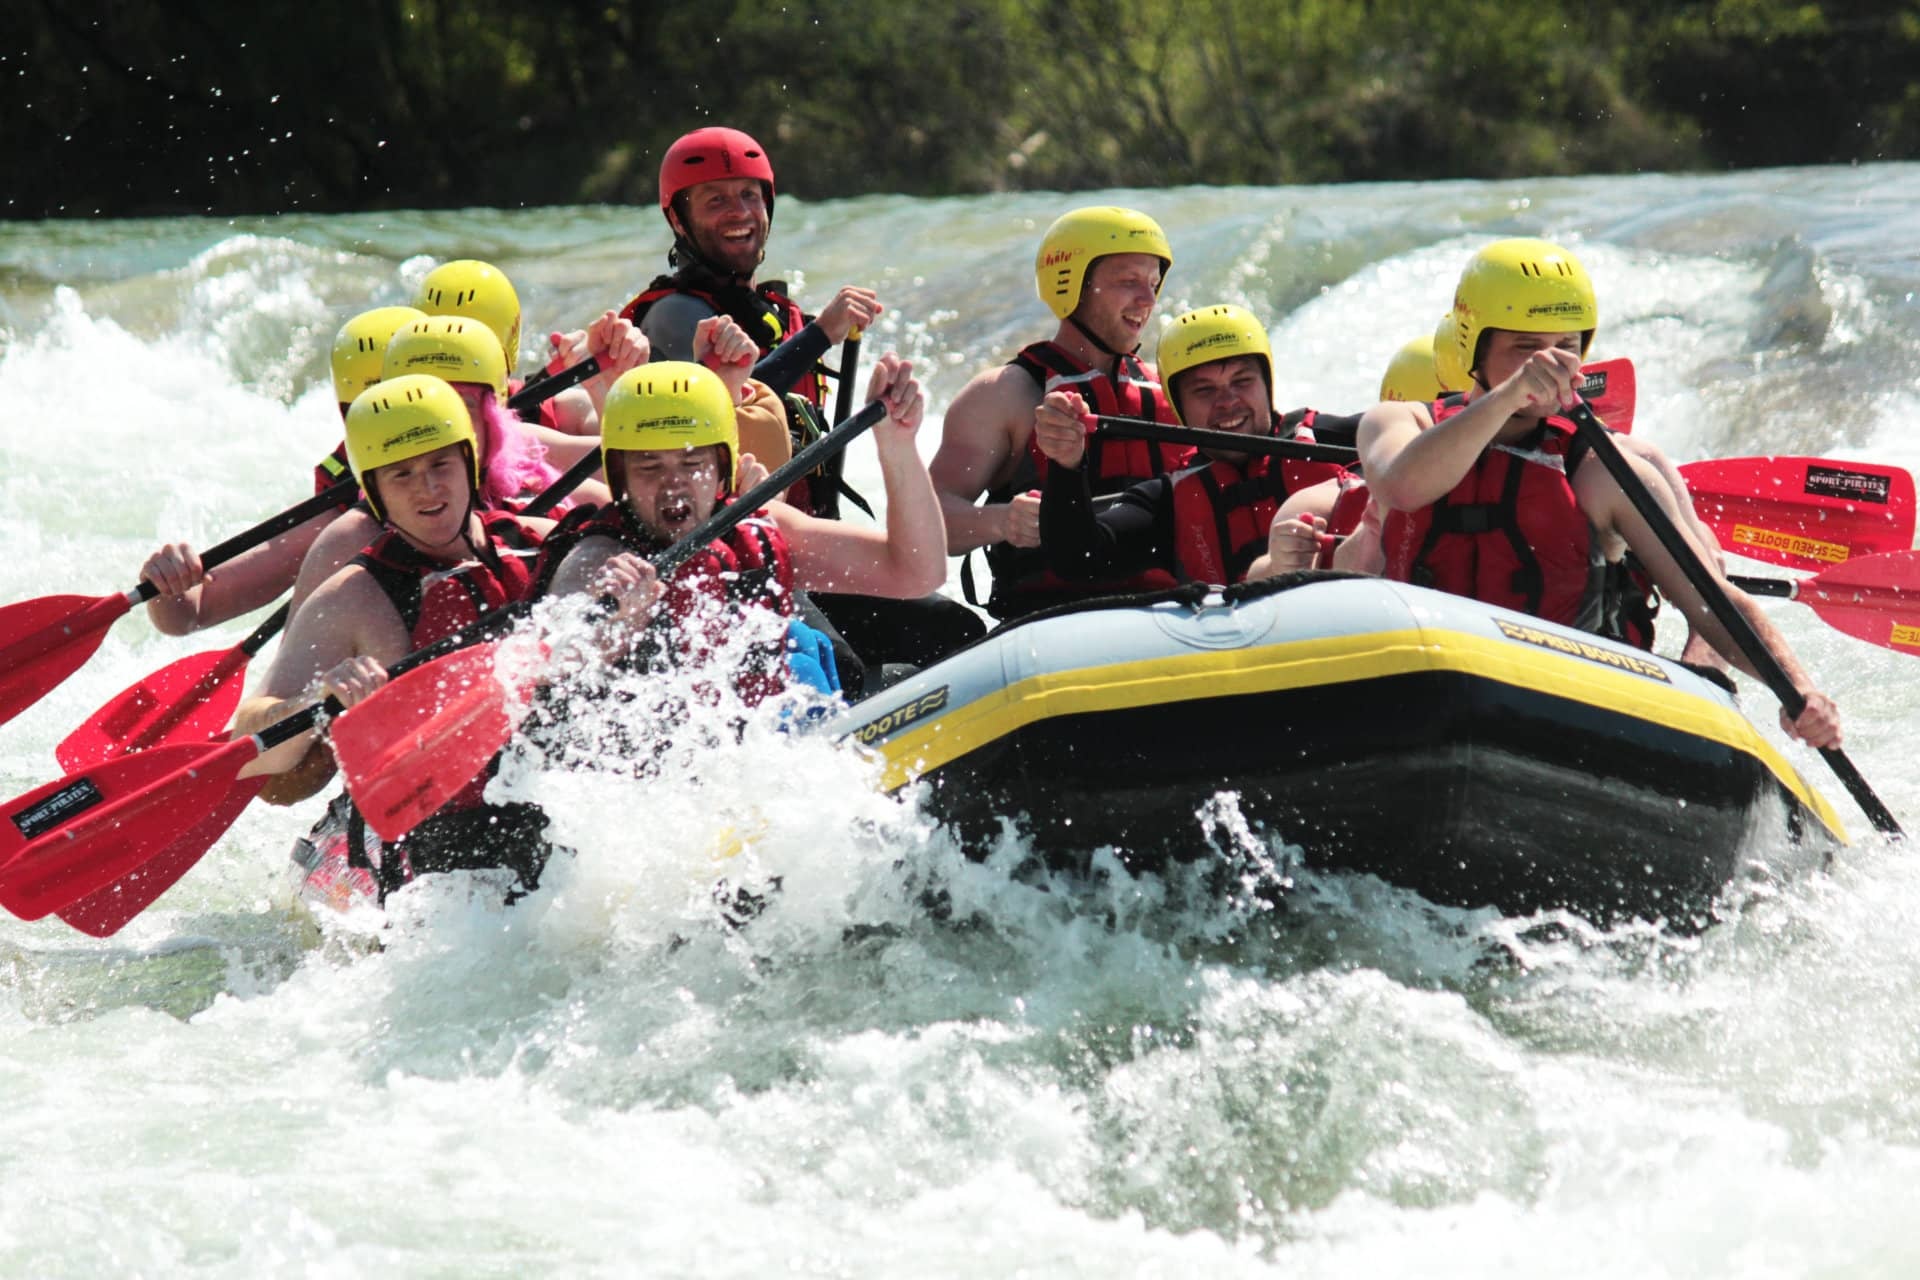 Rafting: Tourists have fun during their maneuvering over intense rapids. 1920x1280 HD Background.